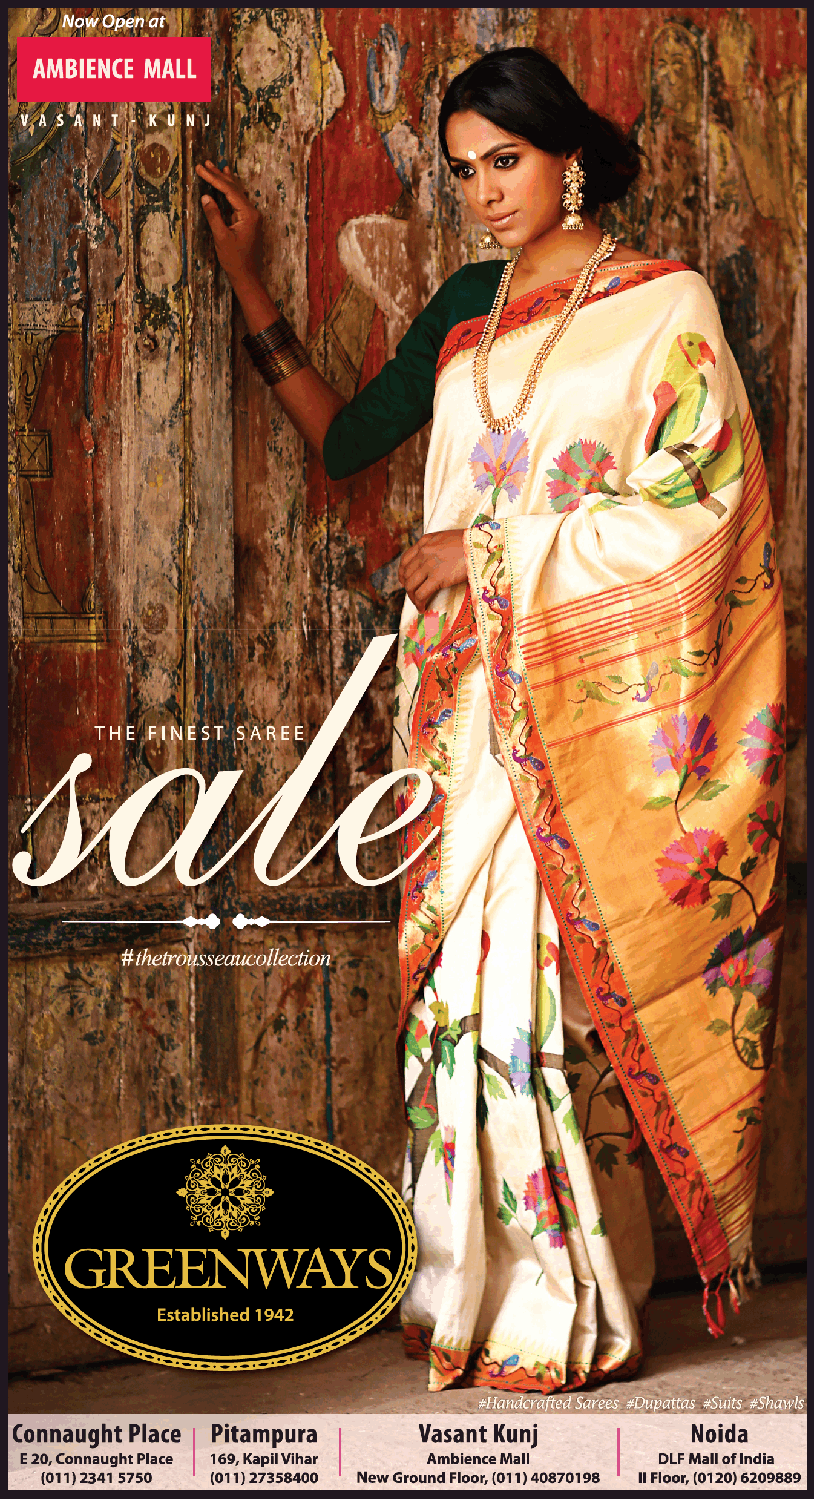 greenways-the-finest-saree-sale-ad-times-of-india-delhi-27-01-2019.png